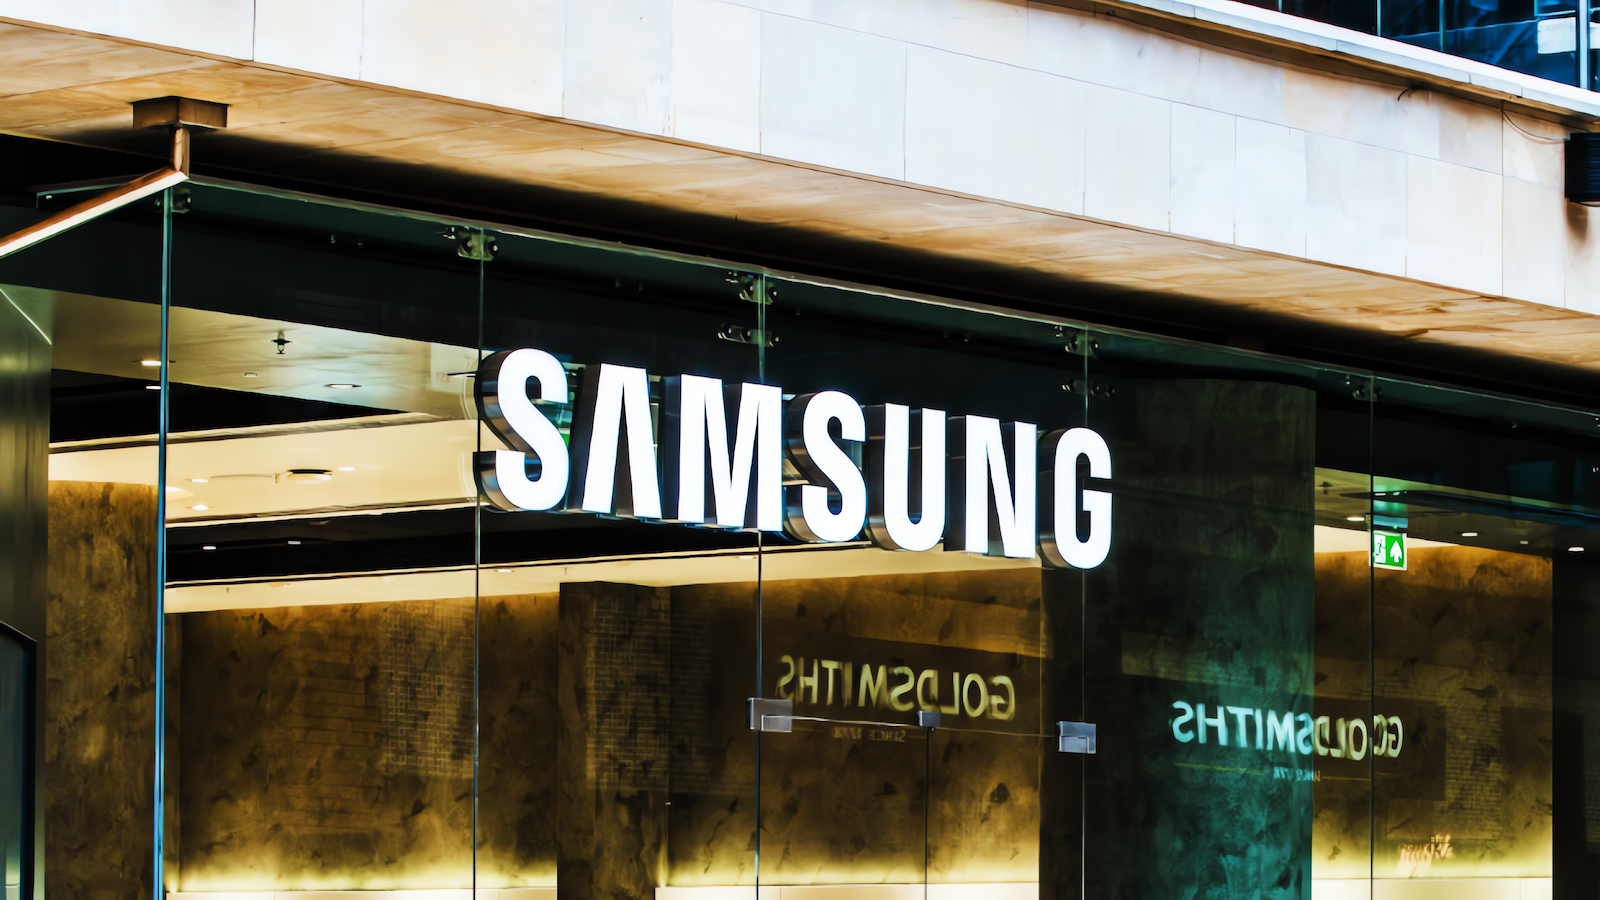 the Samsung data breach occurred over a year ago, compromising certain contact information of Samsung U.K. e-store customers.